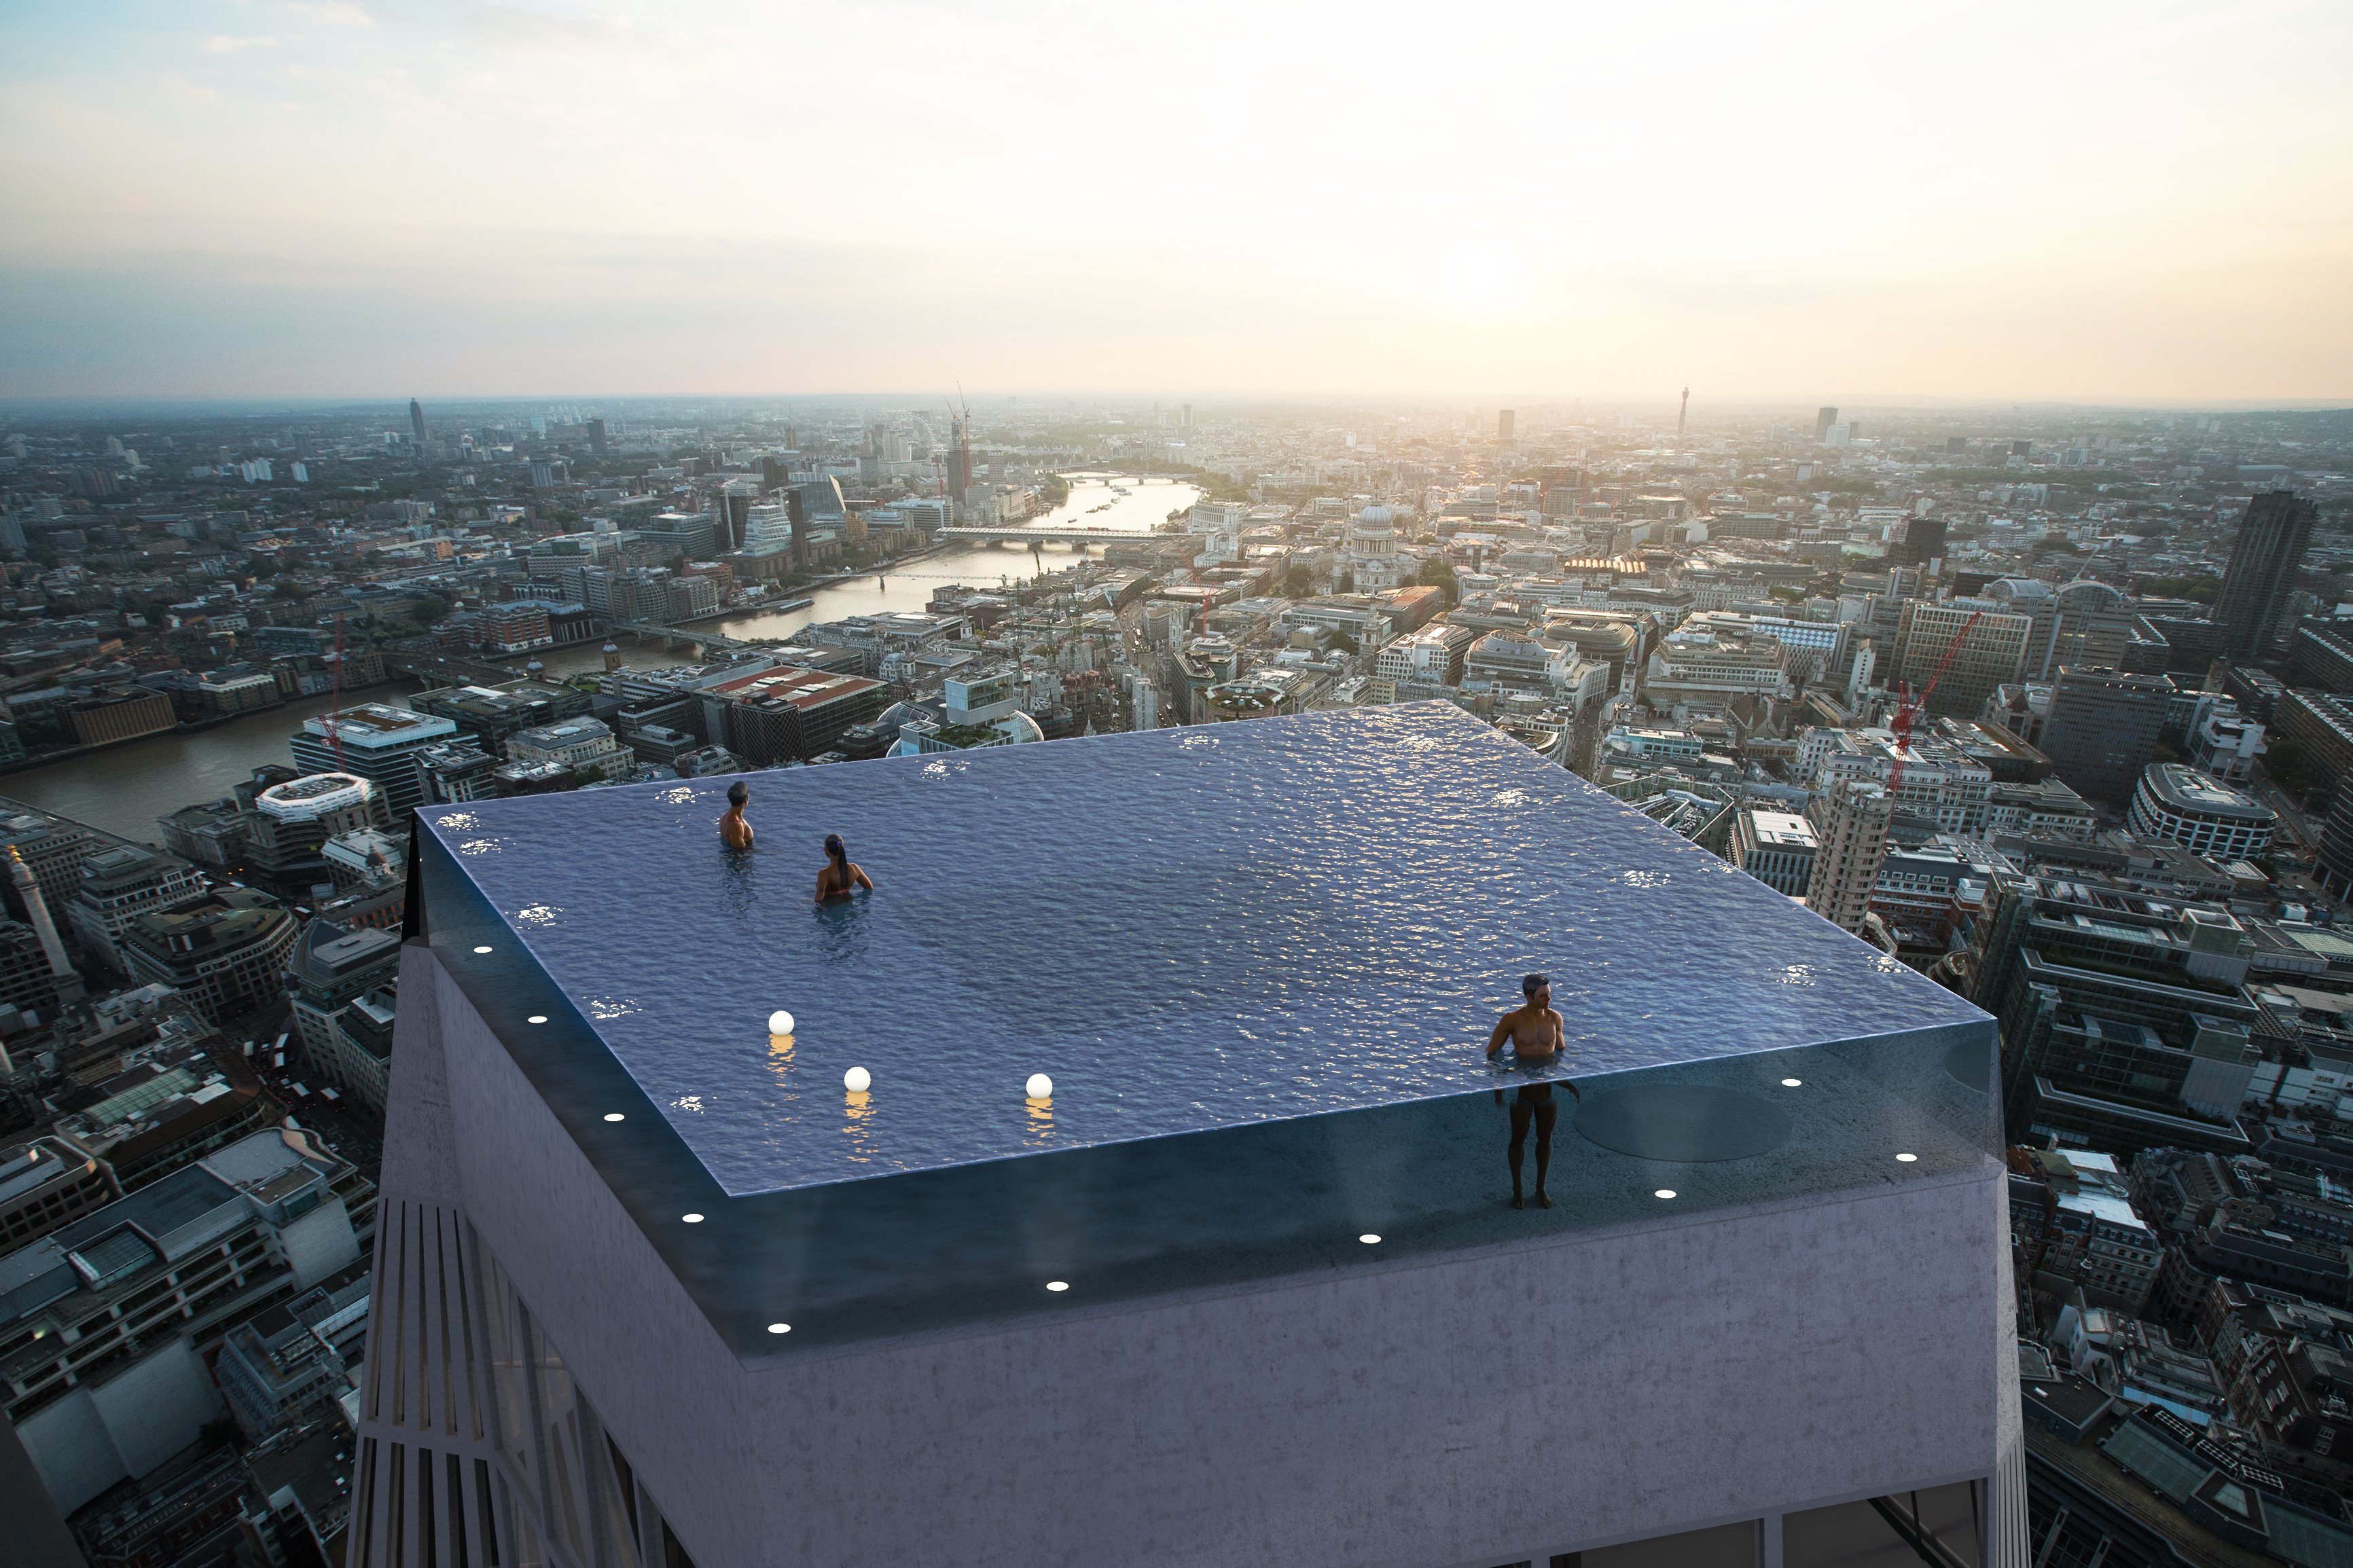 And finally… designers propose world’s first 360-degree infinity pool atop London skyscraper